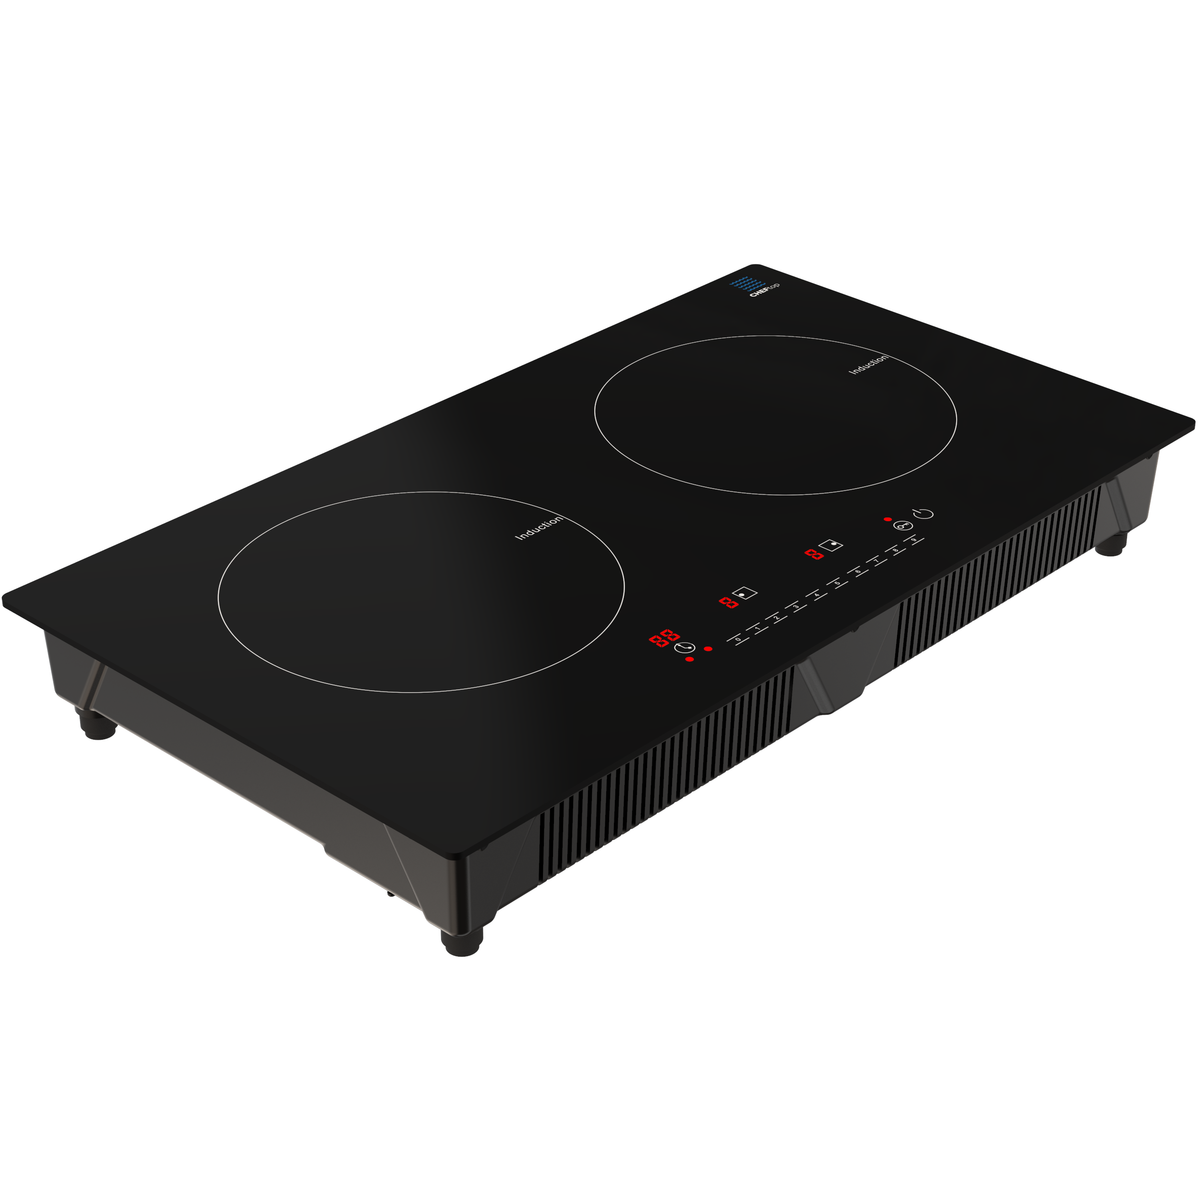 Drinkpod Cheftop Portable Induction Cooktop 2 Burner Electric